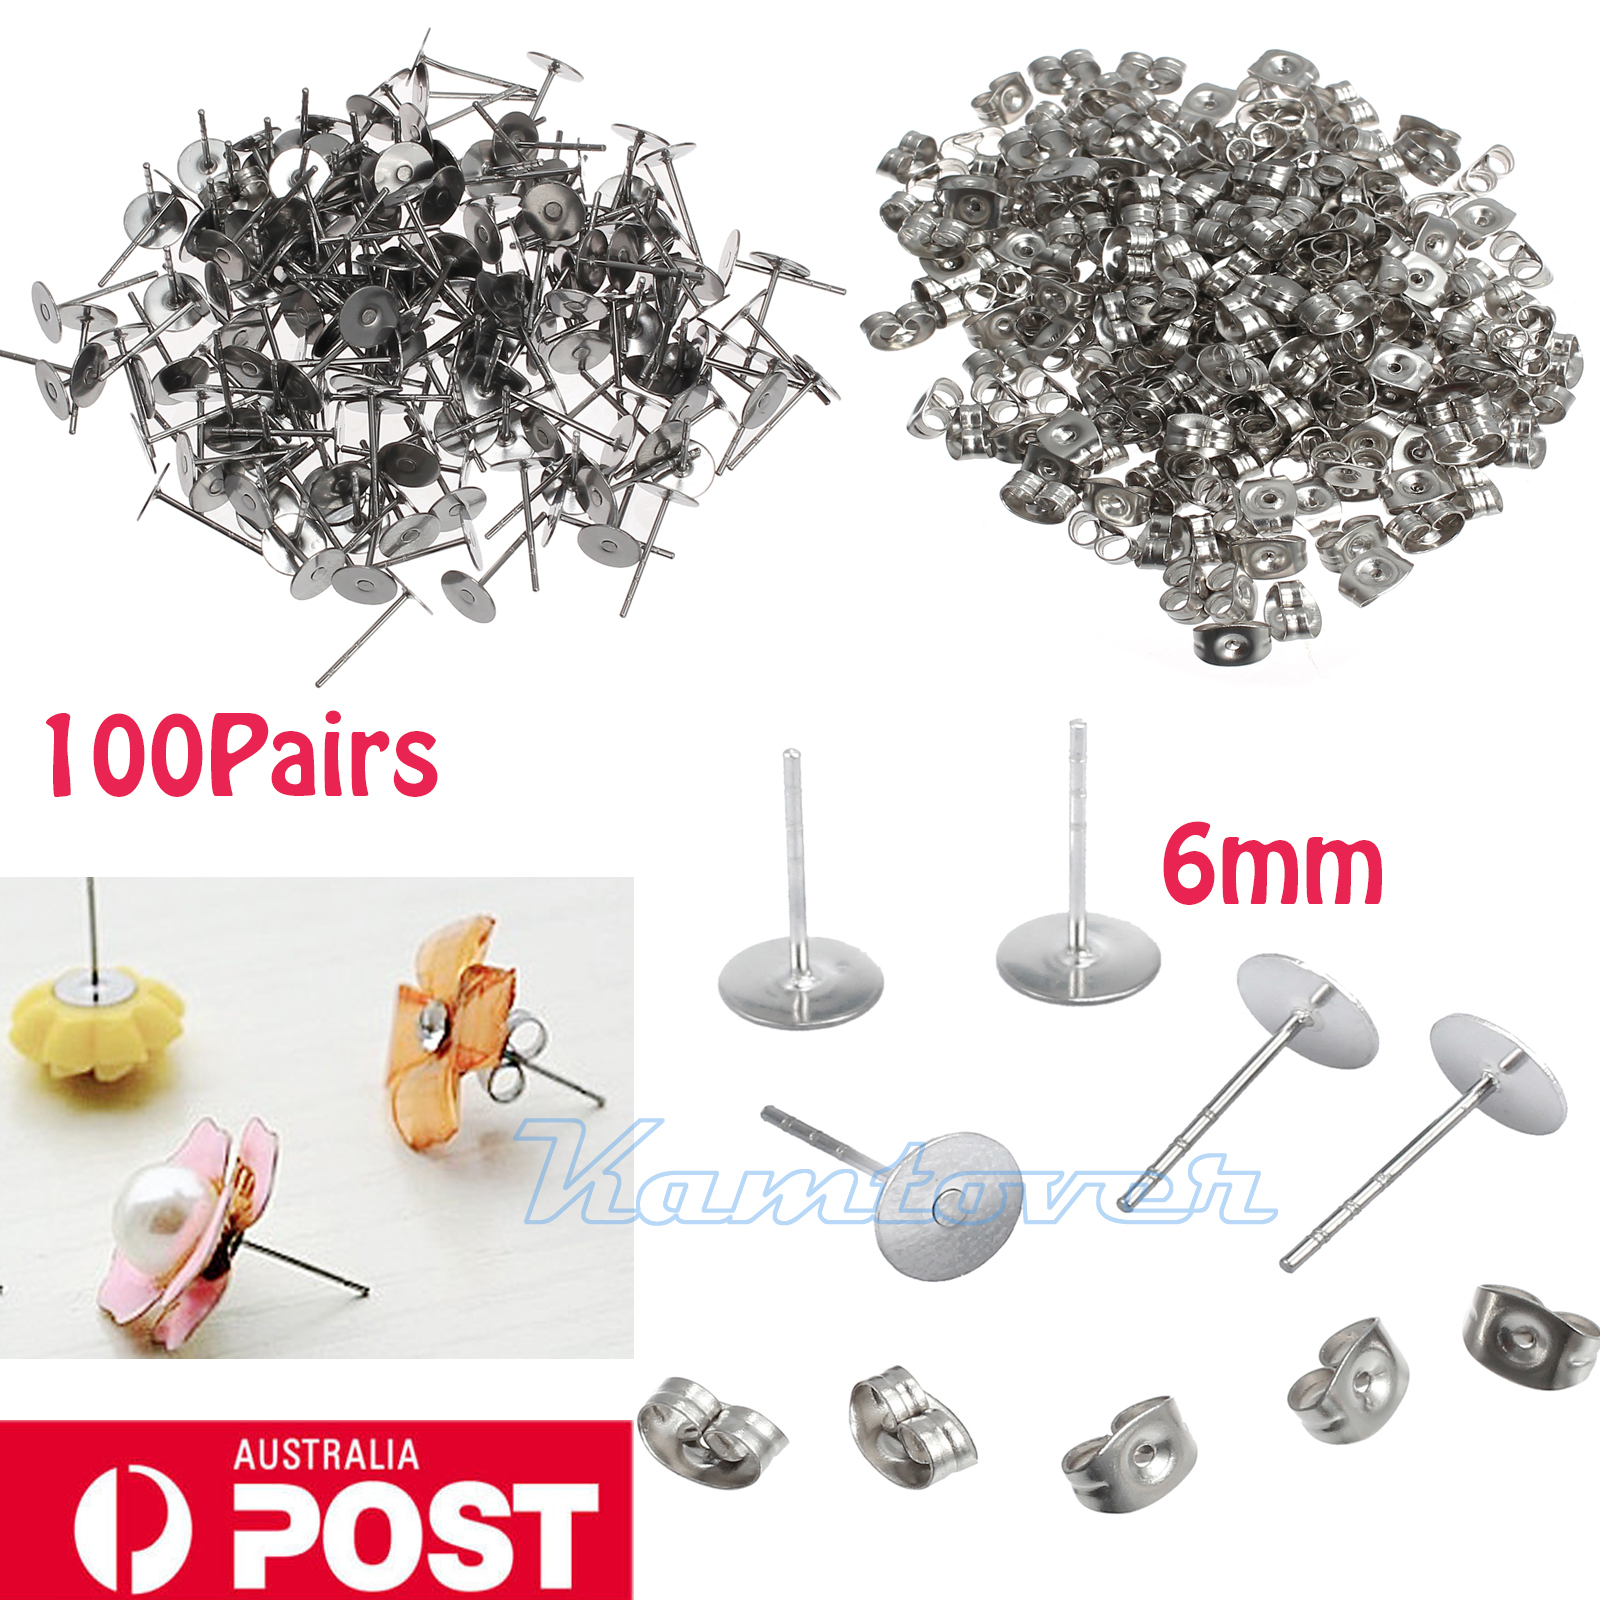 200pcs Earring Stud Posts 6mm Pads and backs Hypoallergenic Surgical ...